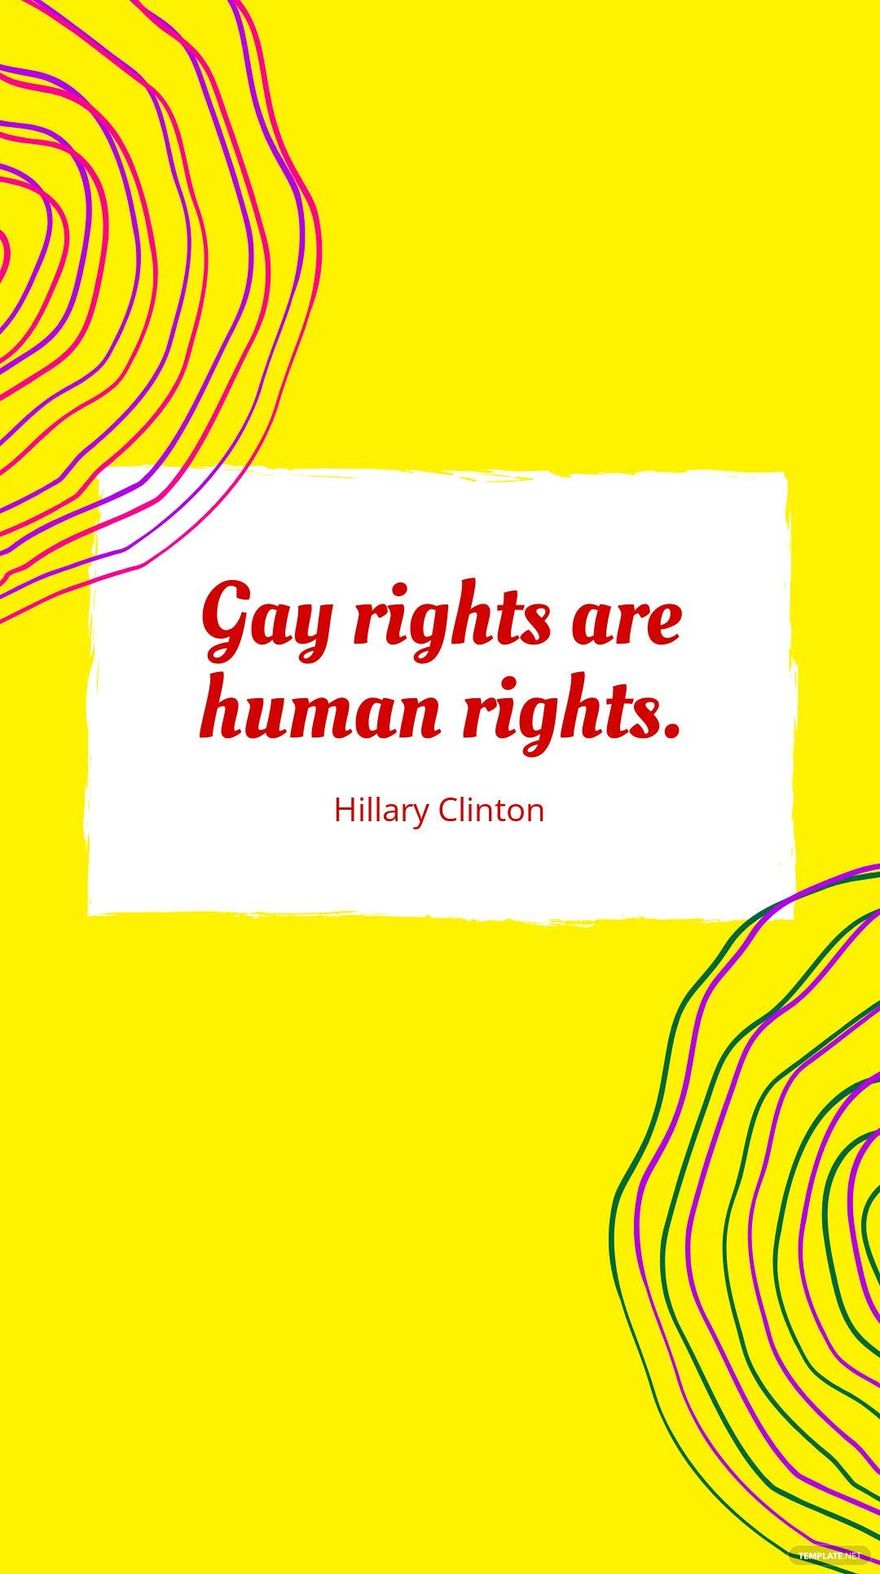 Hillary Clinton - Gay rights are human rights.